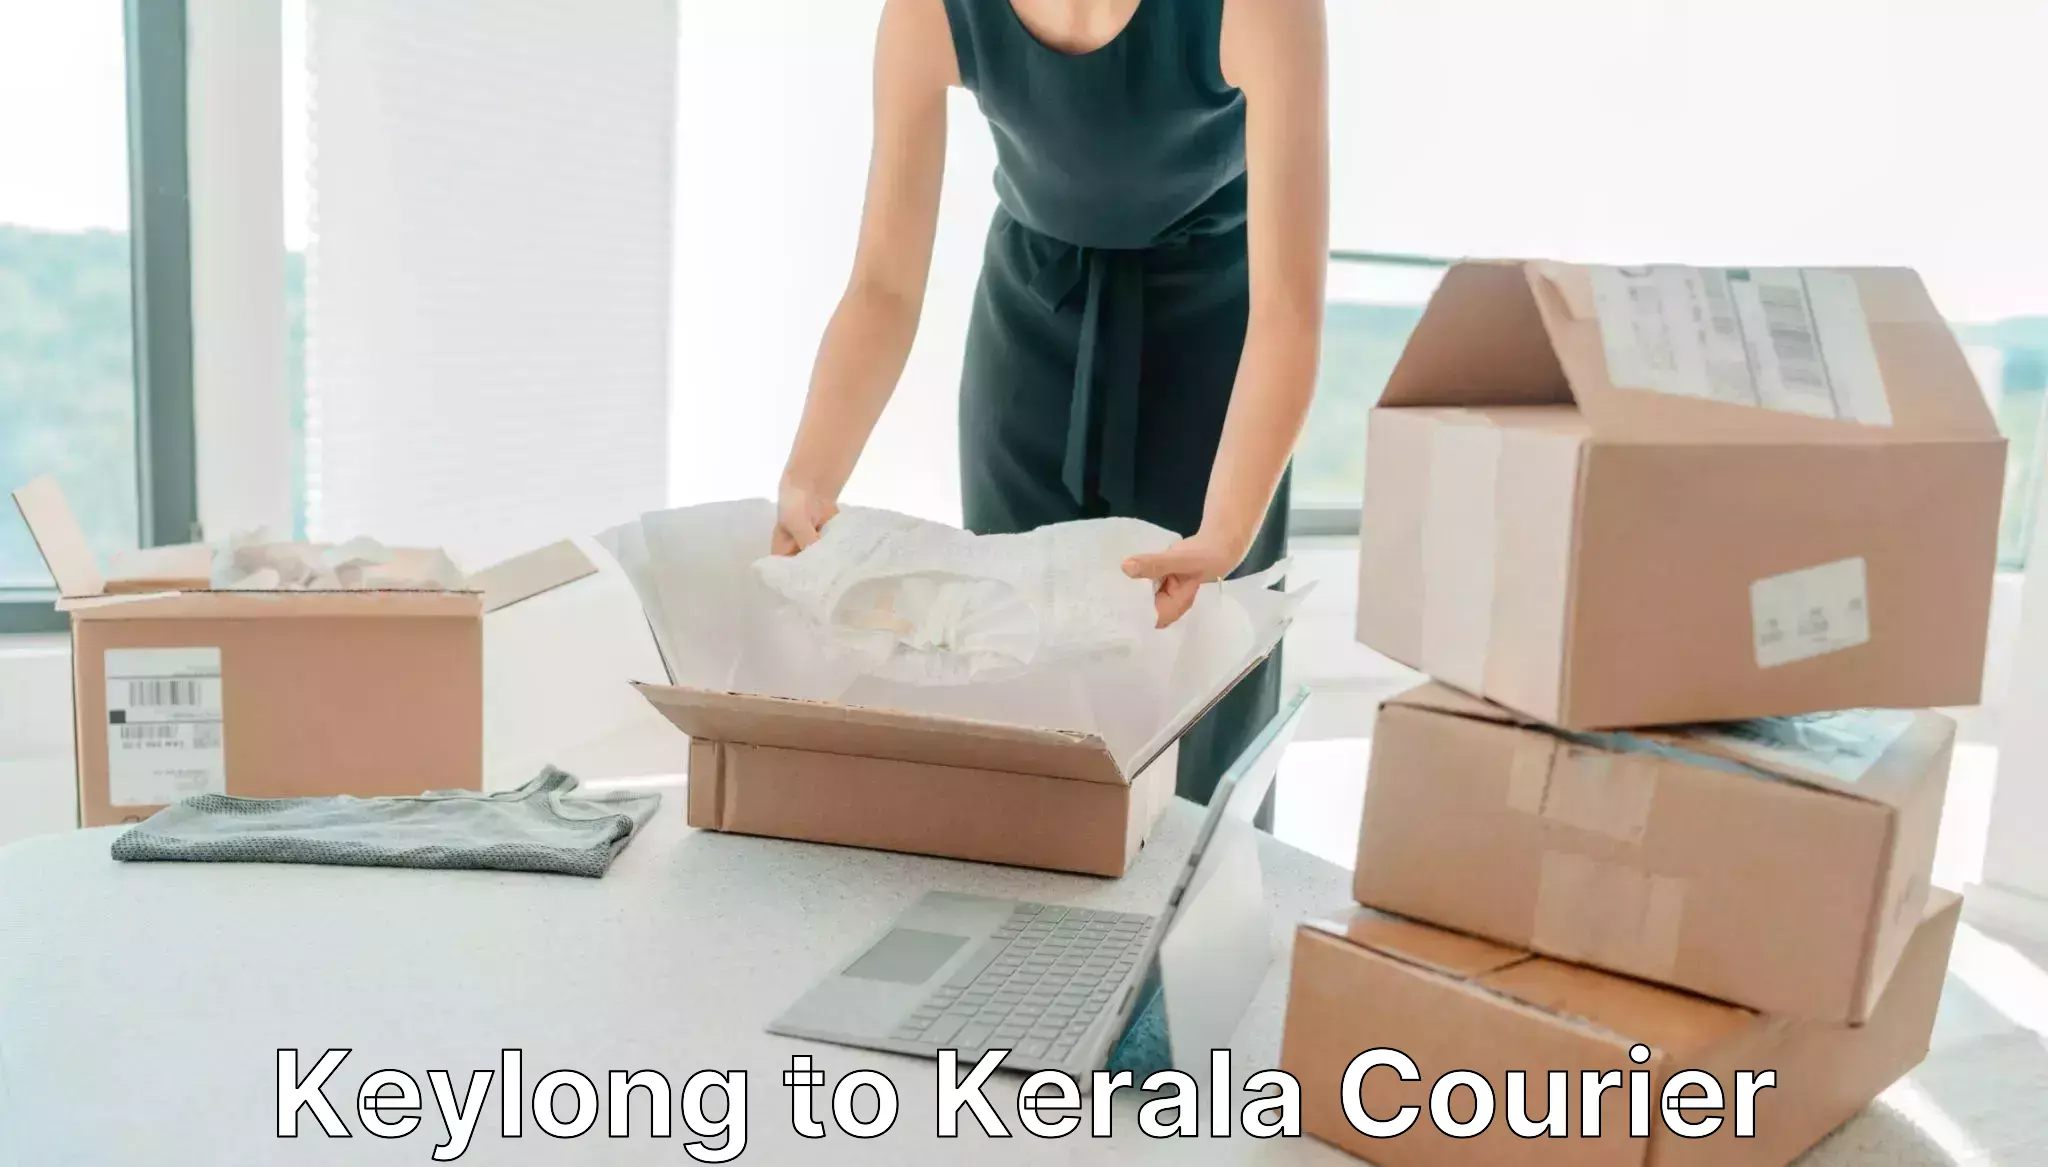 Flexible delivery scheduling Keylong to Cochin Port Kochi